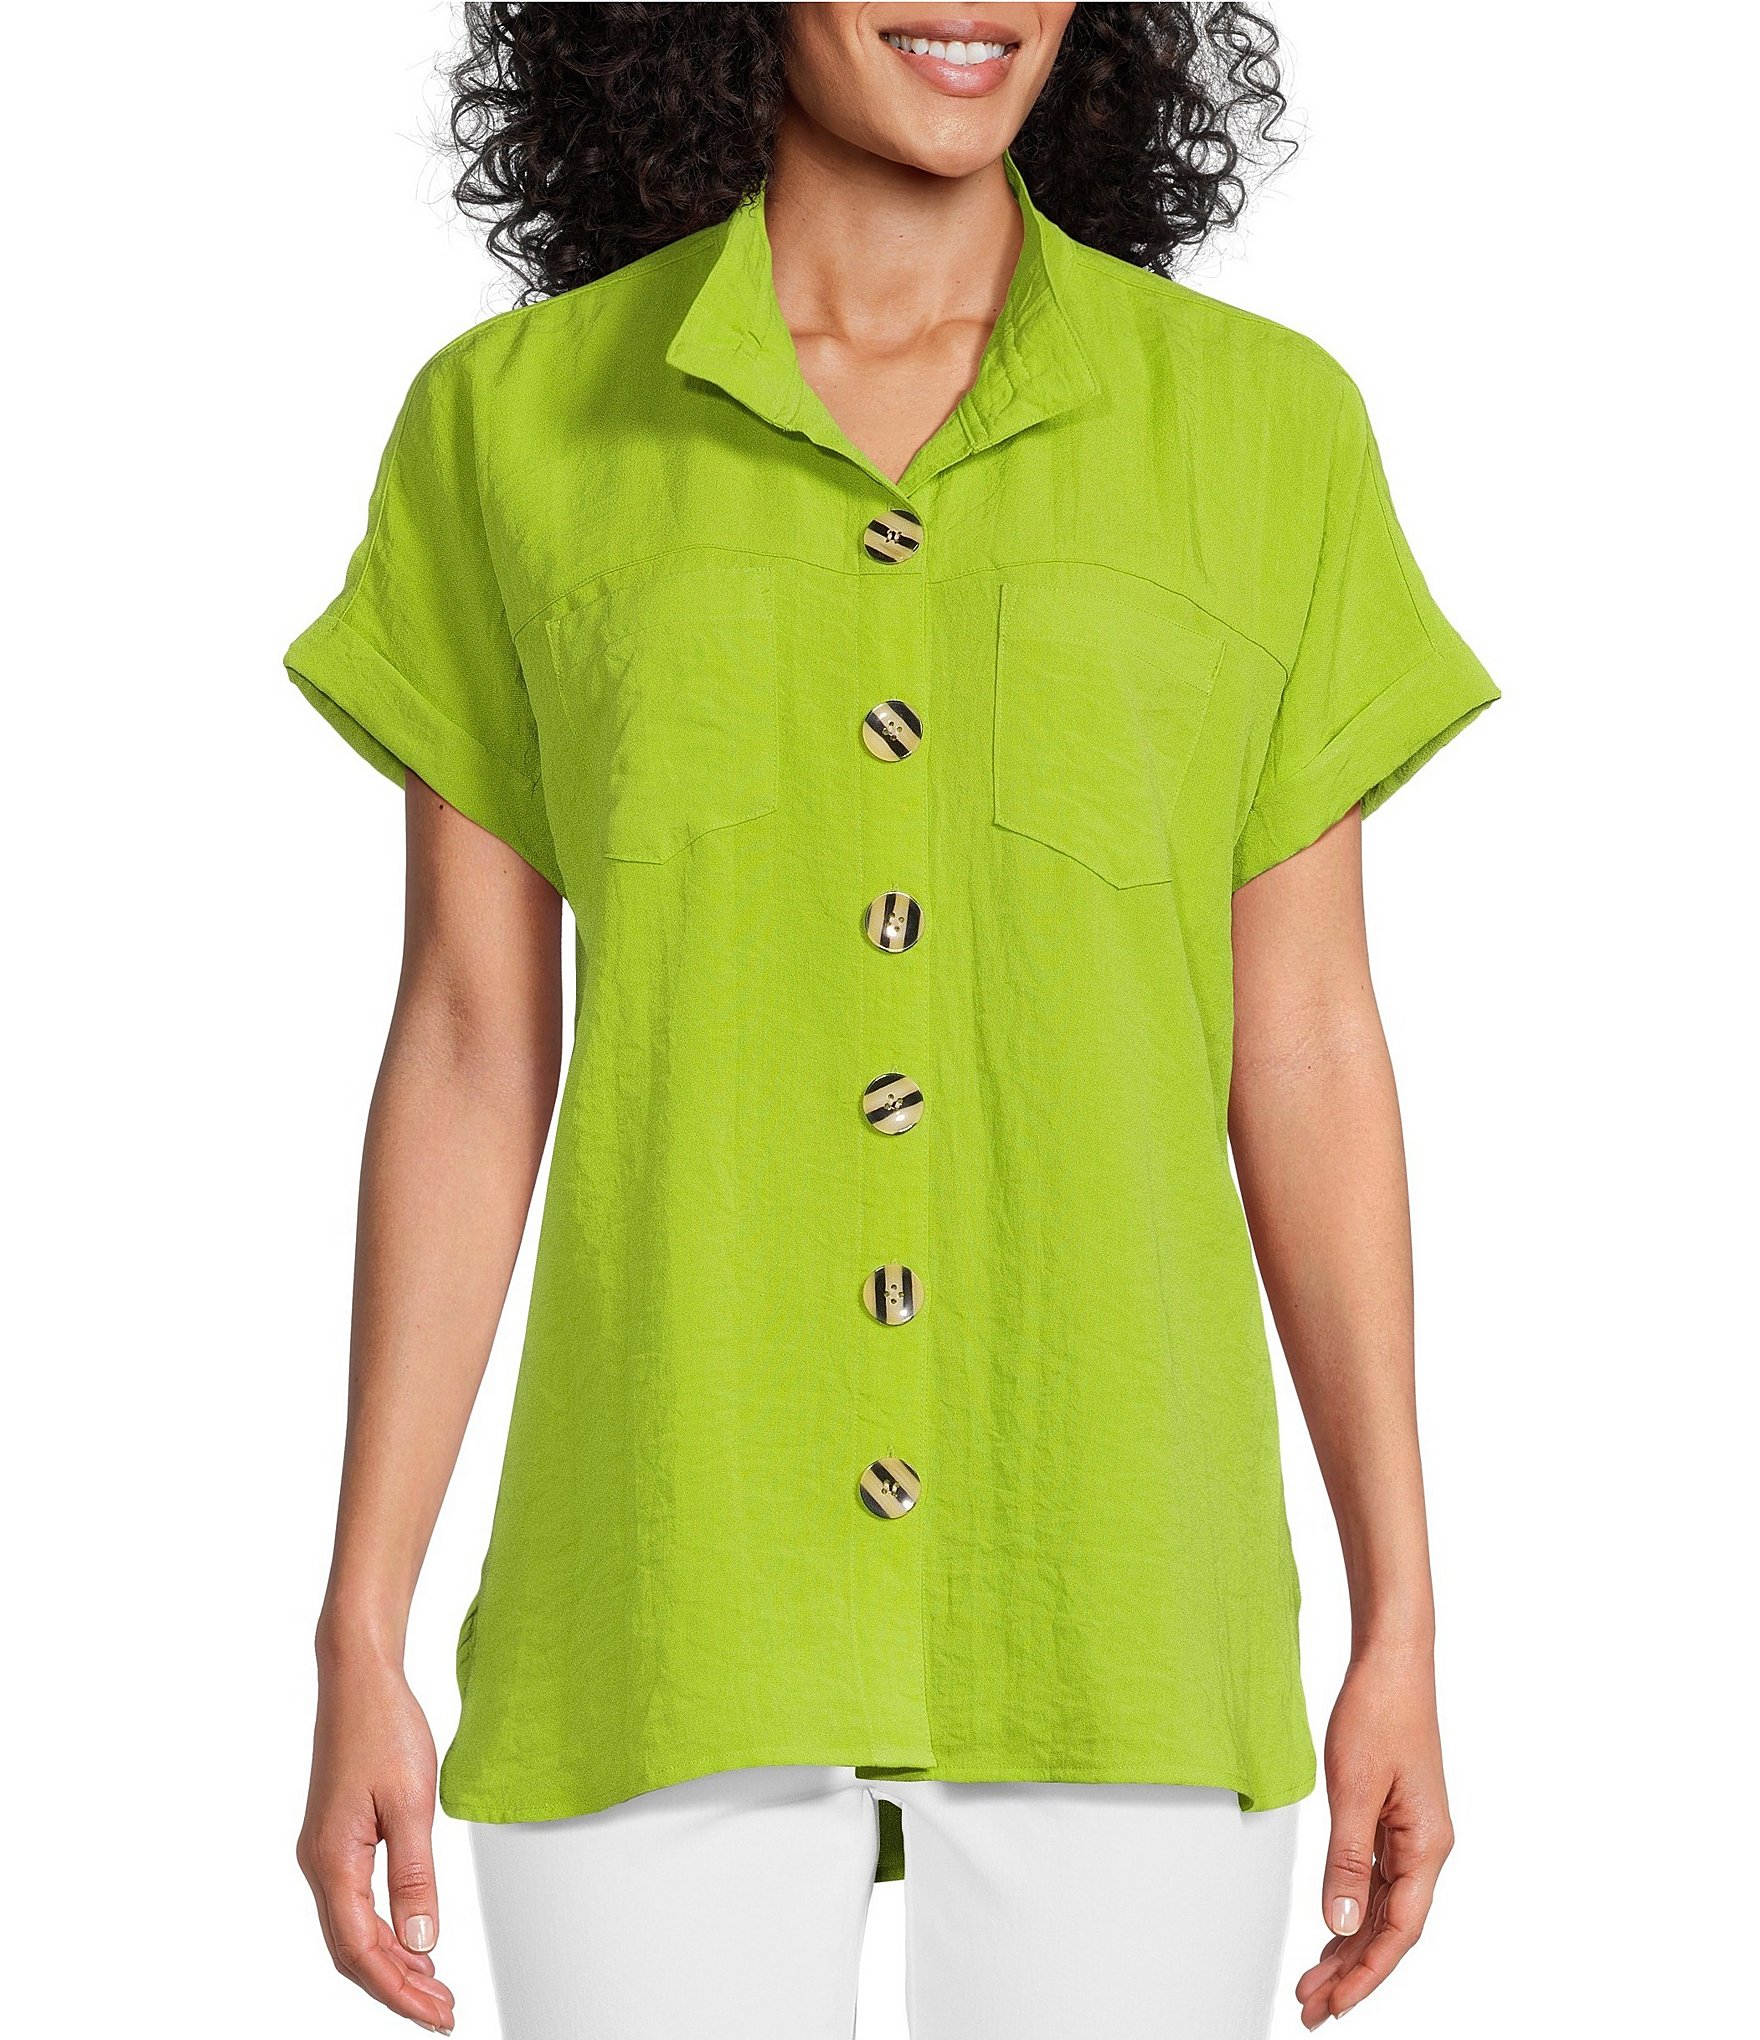 Buy Ladies Casual Tops - Buy Latest Casual Tops for Women Online